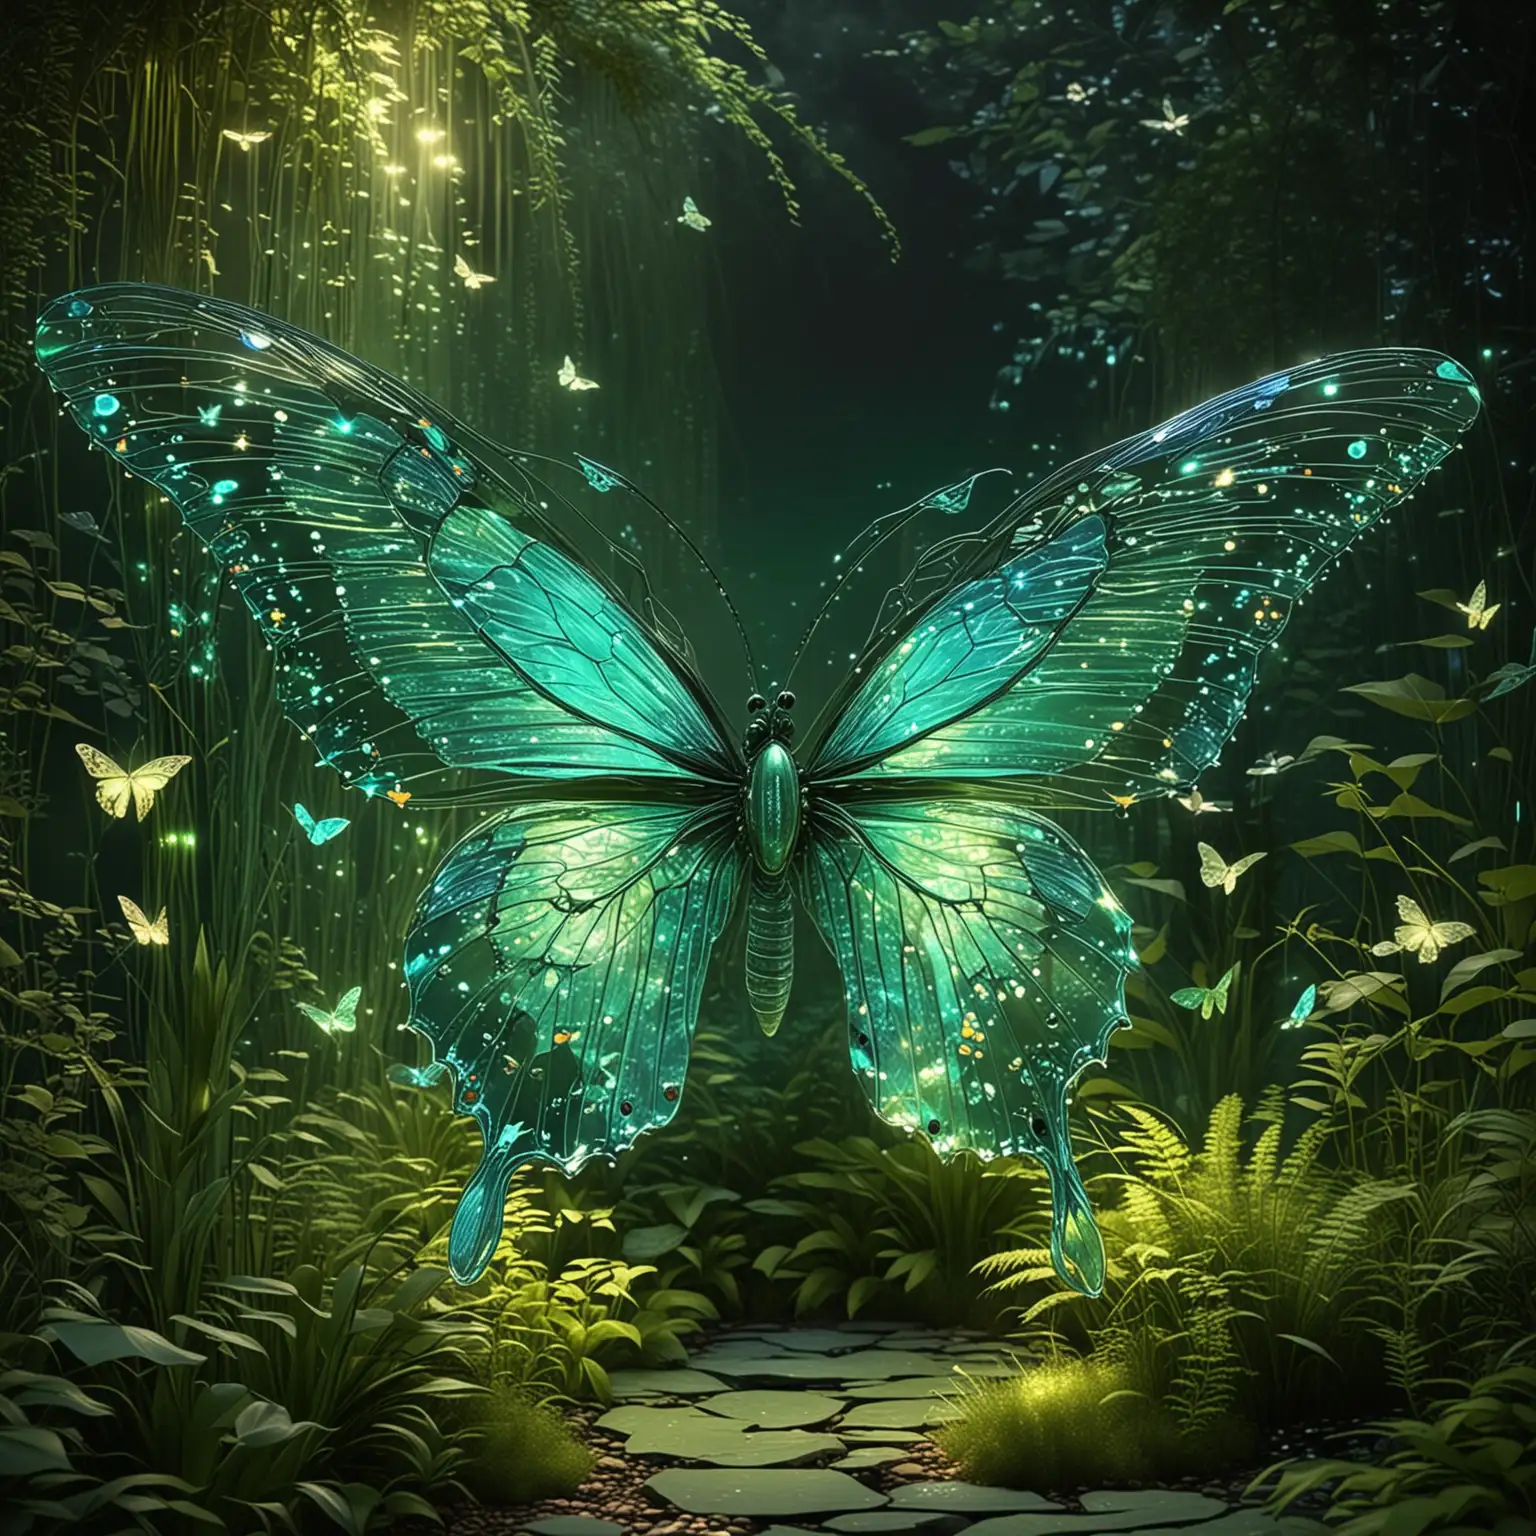 Futuristic Wildlife Oasis. style of a fluttering butterfly garden, blending wildlife sanctuaries with futuristic glowing enhancements, in butterfly wing iridescent and cyber mesh light green and green